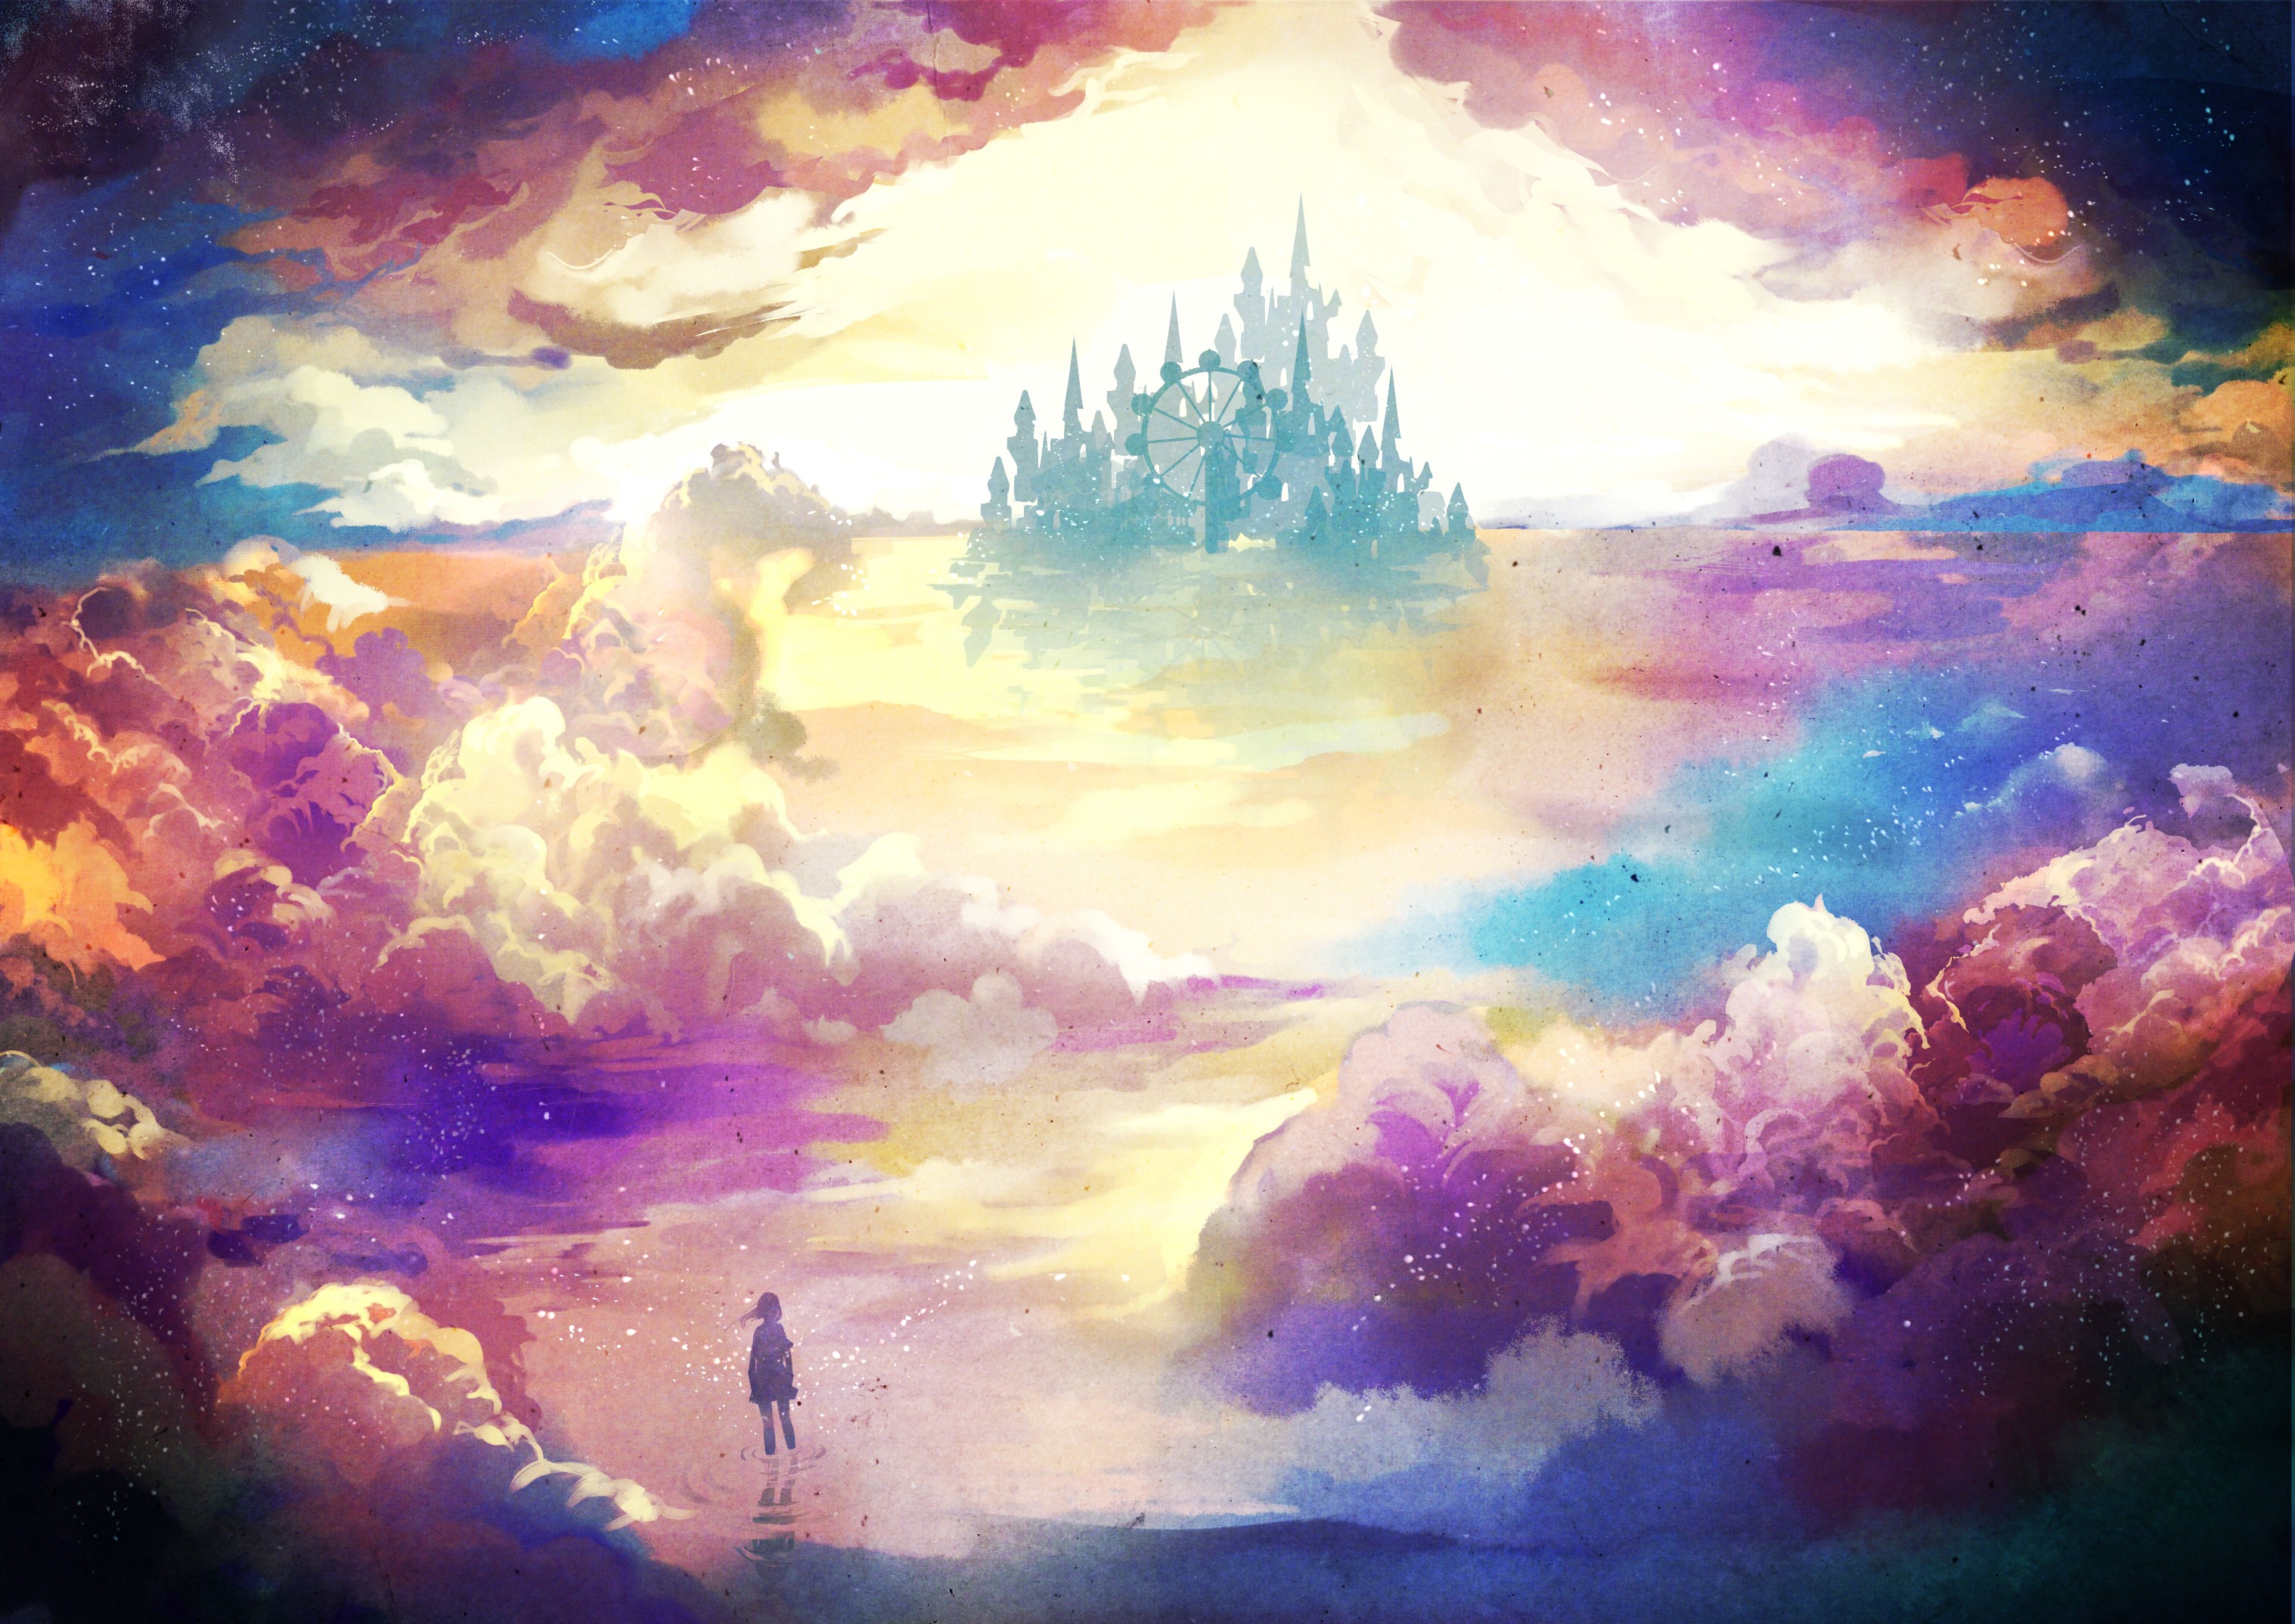 Walking to a fantasy city in the clouds by kanehiko